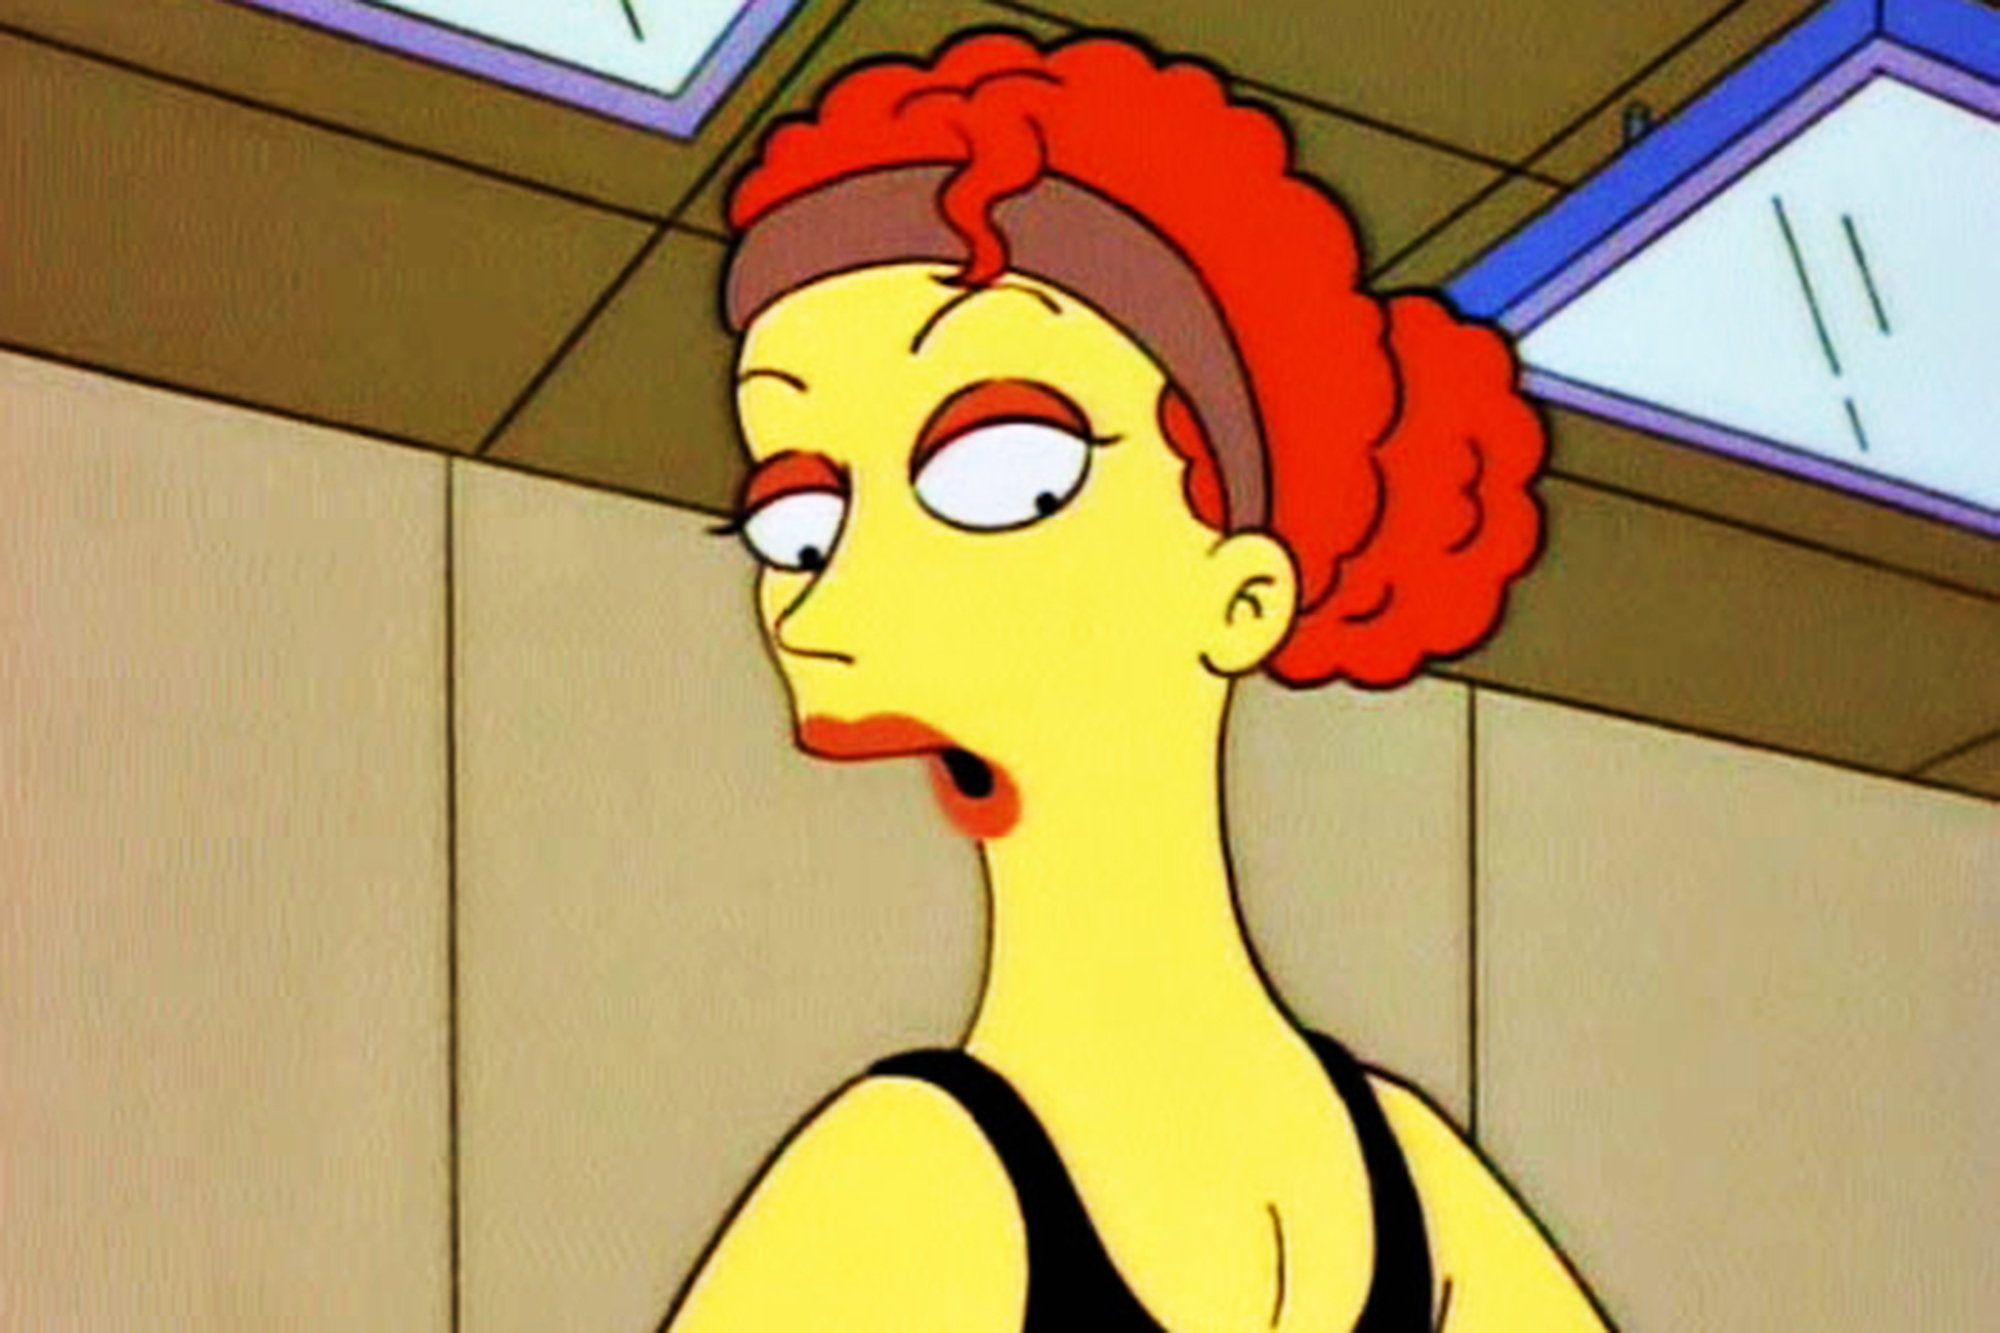 Susan Sarandon: Sarandon appeared in "Homer vs. Patty and Selma" in 1995 as a ballet teacher and voiced FeMac, a computer won by Ned Flanders in a rubber duck racing contest, in "Bart Has Two Mommies" in 2006.